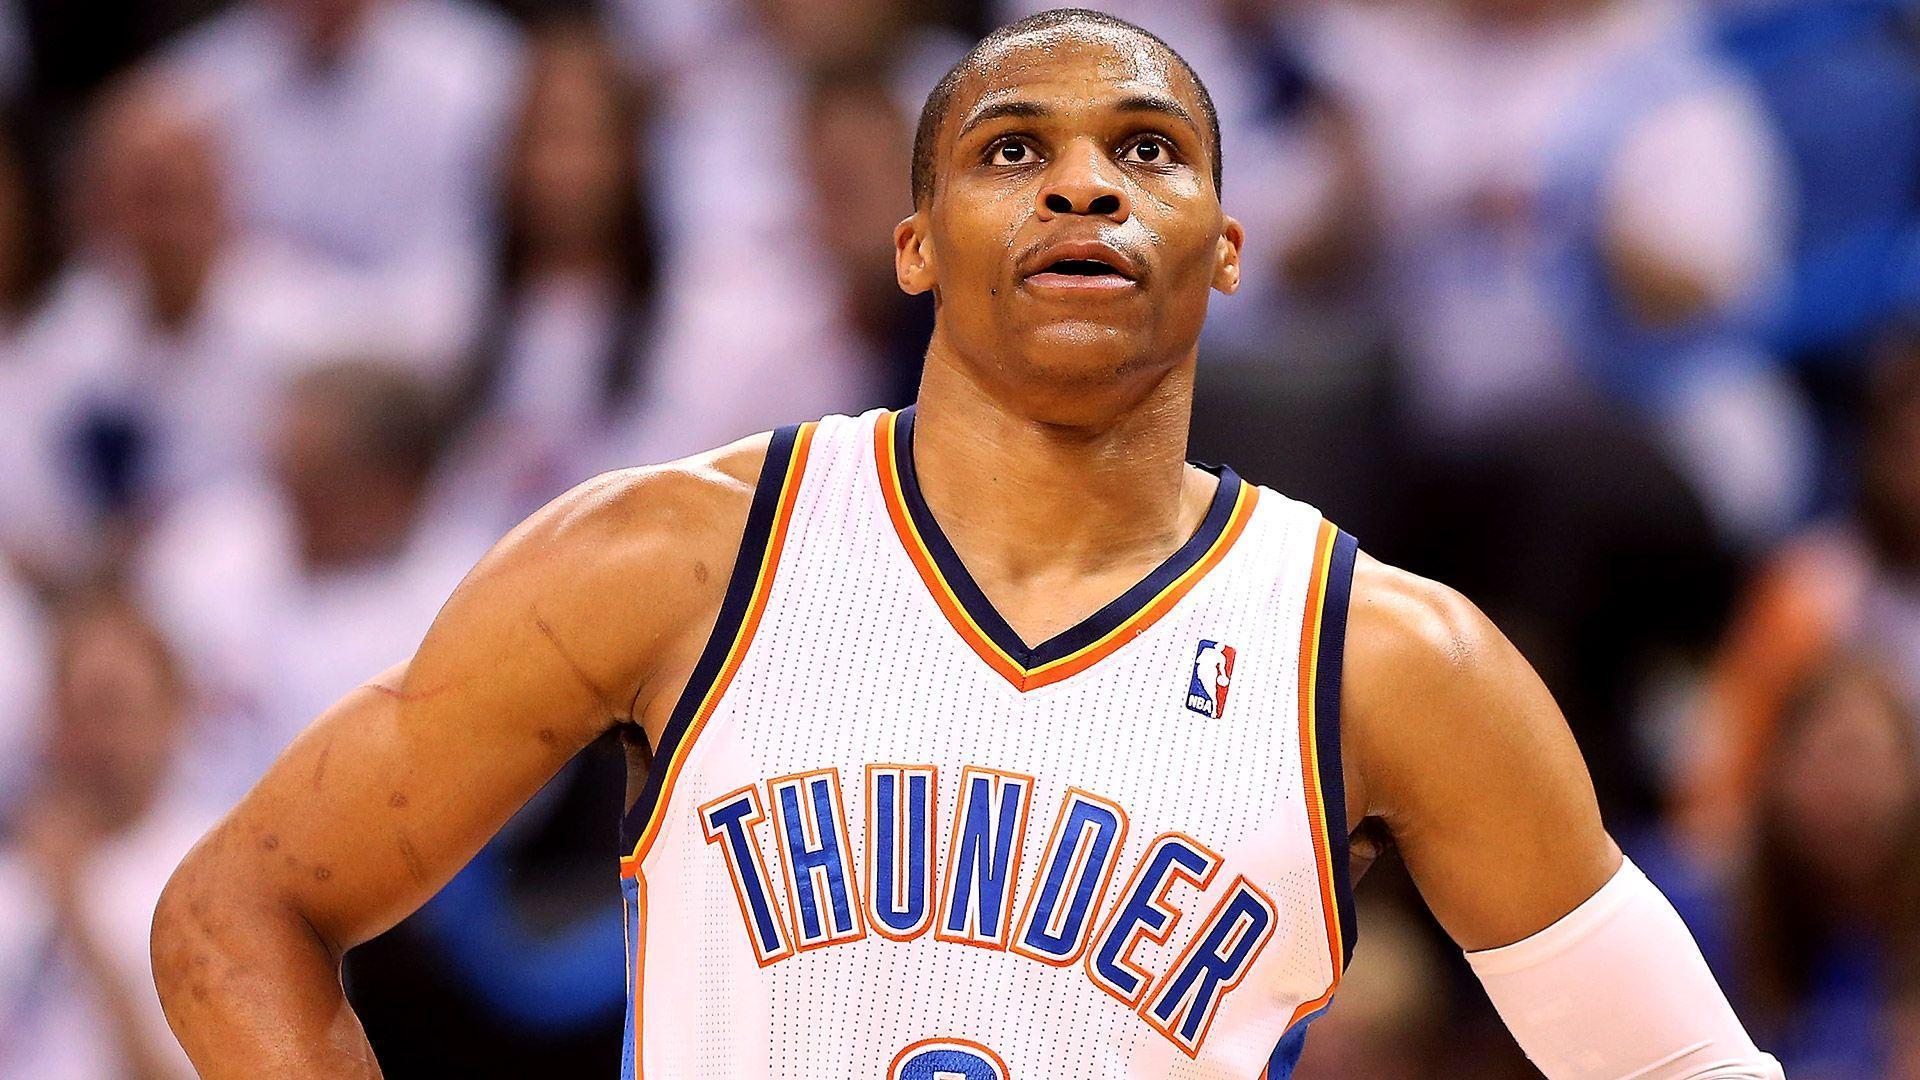 Russell Westbrook Wallpaper 1080p Wall Decoration Ideas